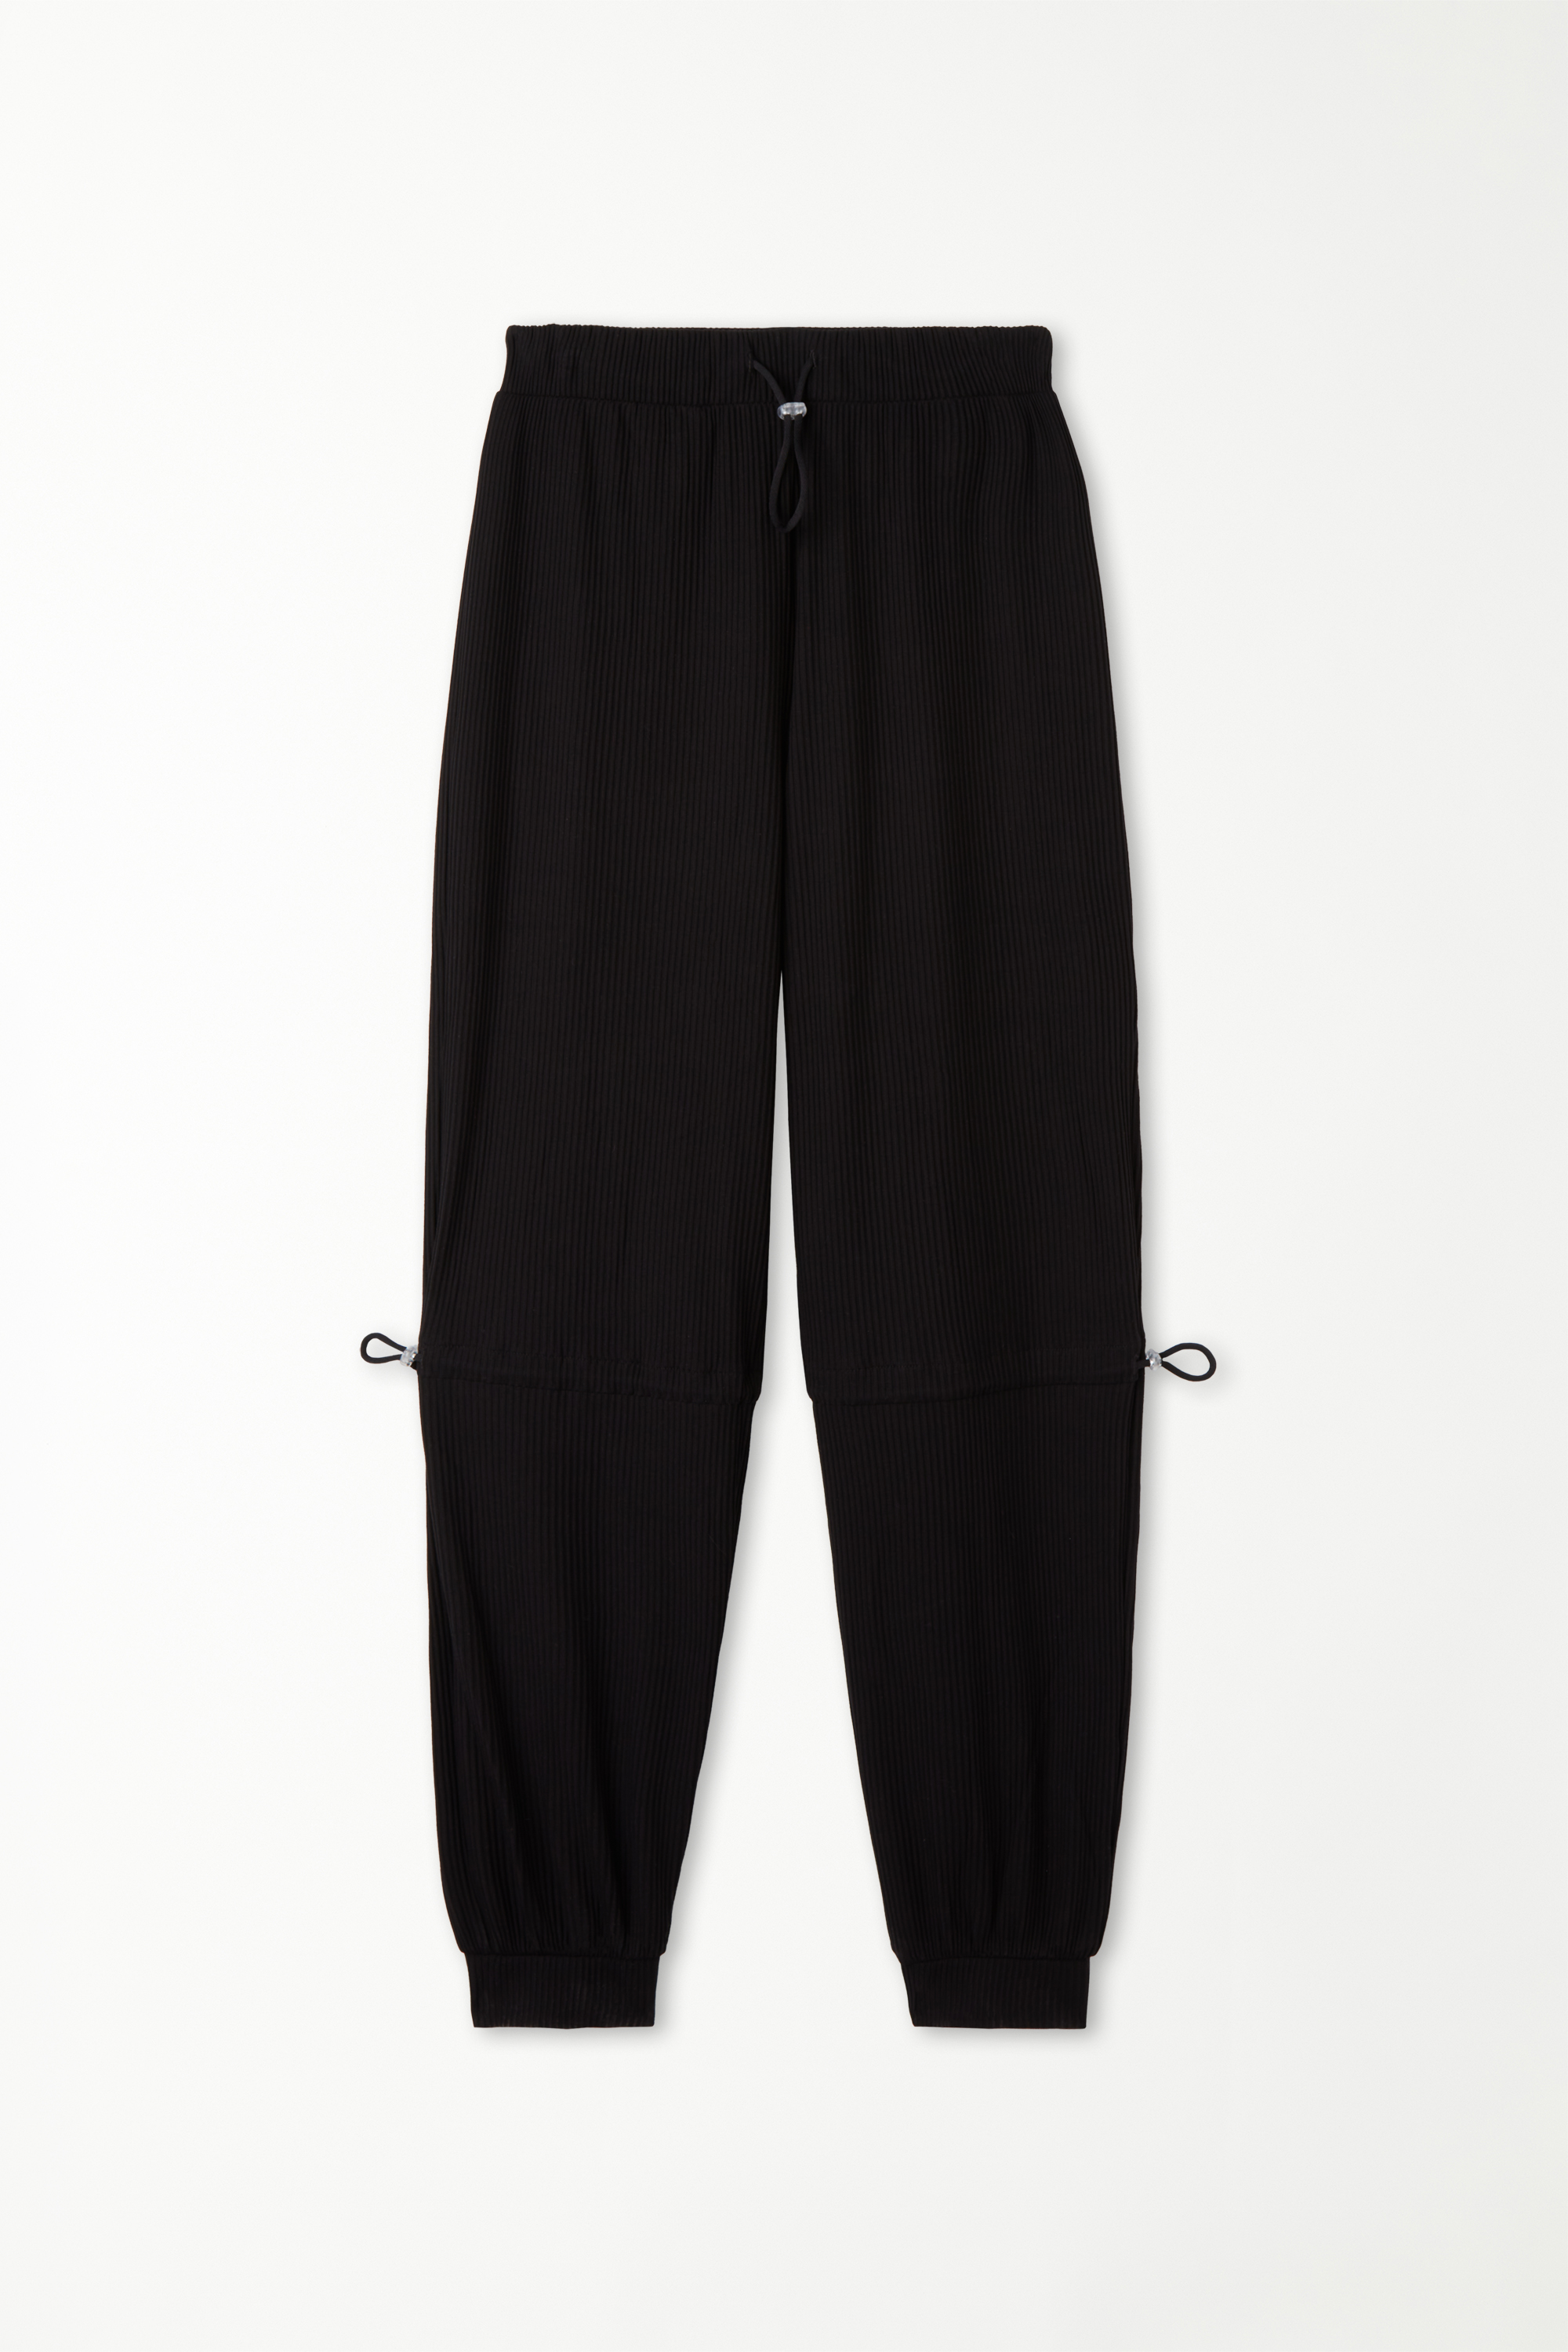 Ribbed Joggers with Adjustable Elastic Drawstrings